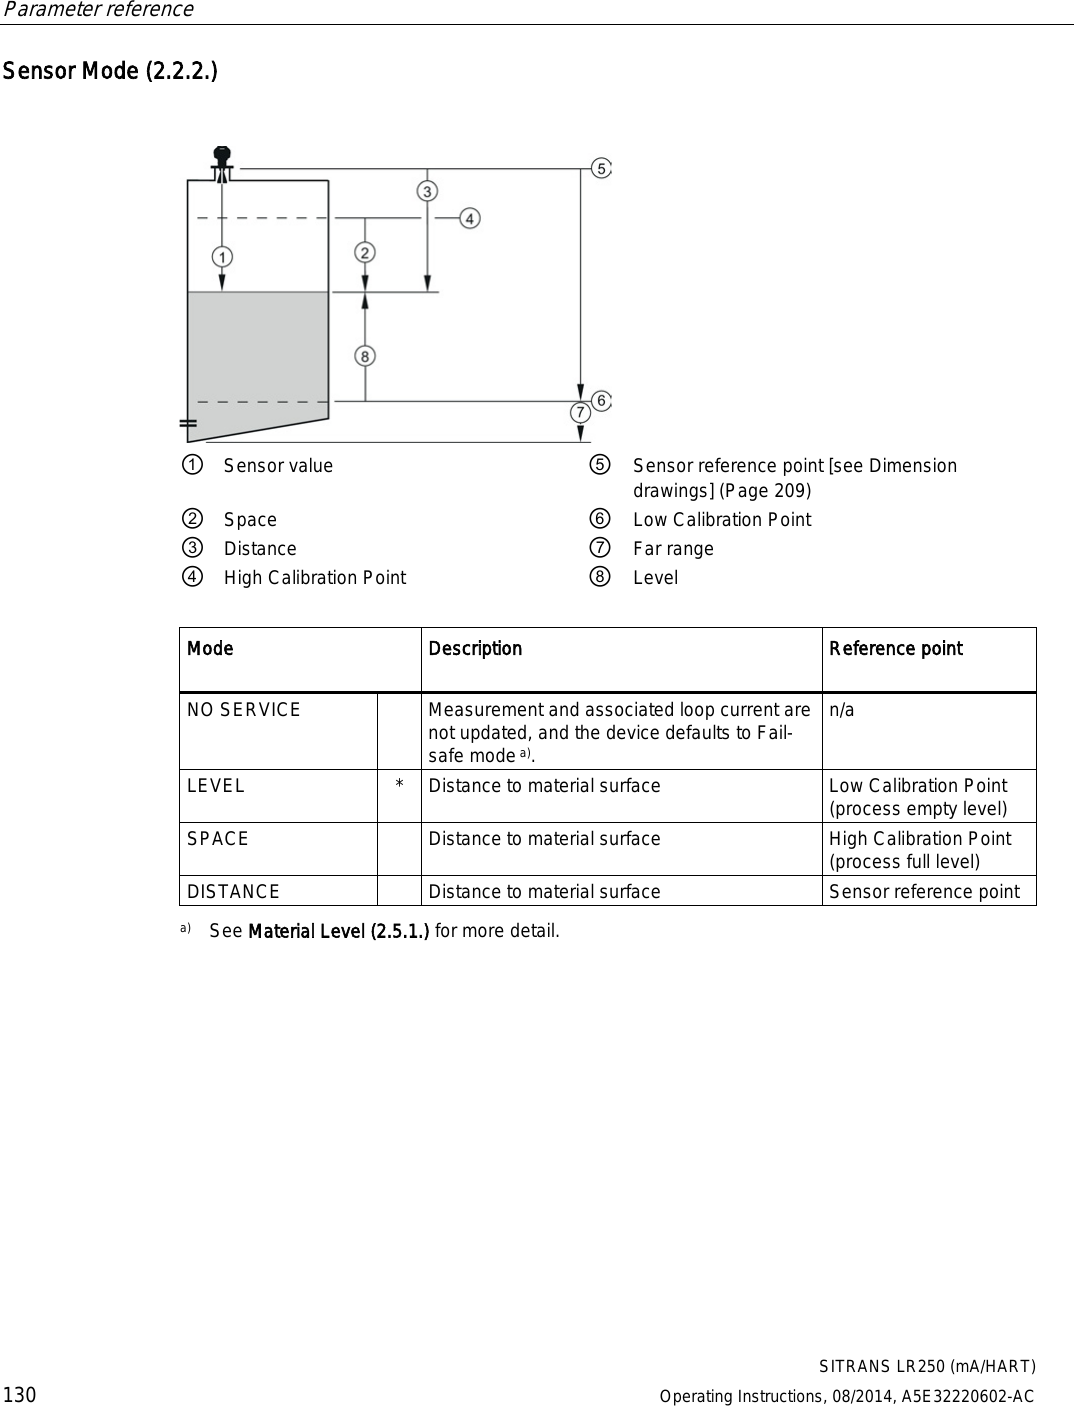 Parameter reference    SITRANS LR250 (mA/HART) 130 Operating Instructions, 08/2014, A5E32220602-AC Sensor Mode (2.2.2.)   ① Sensor value ⑤ Sensor reference point [see Dimension drawings] (Page 209) ② Space ⑥ Low Calibration Point ③ Distance ⑦ Far range ④ High Calibration Point ⑧ Level  Mode  Description Reference point NO SERVICE    Measurement and associated loop current are not updated, and the device defaults to Fail-safe mode a).  n/a LEVEL  *  Distance to material surface Low Calibration Point (process empty level) SPACE    Distance to material surface High Calibration Point (process full level) DISTANCE  Distance to material surface Sensor reference point  a) See Material Level (2.5.1.) for more detail. 